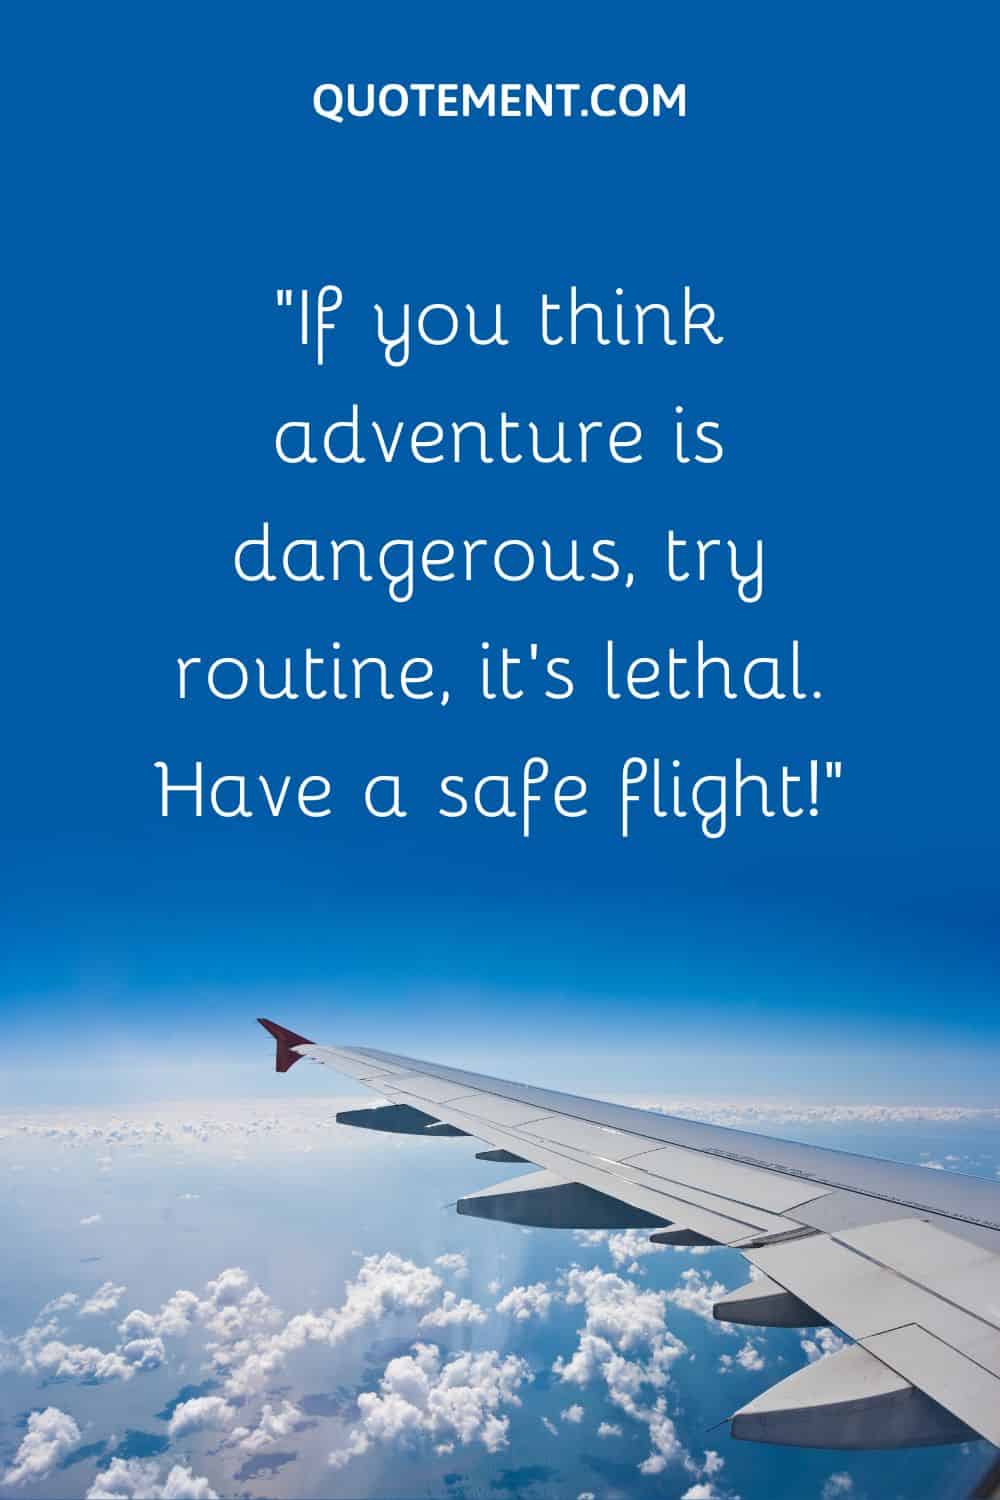 If you think adventure is dangerous, try routine, it’s lethal.